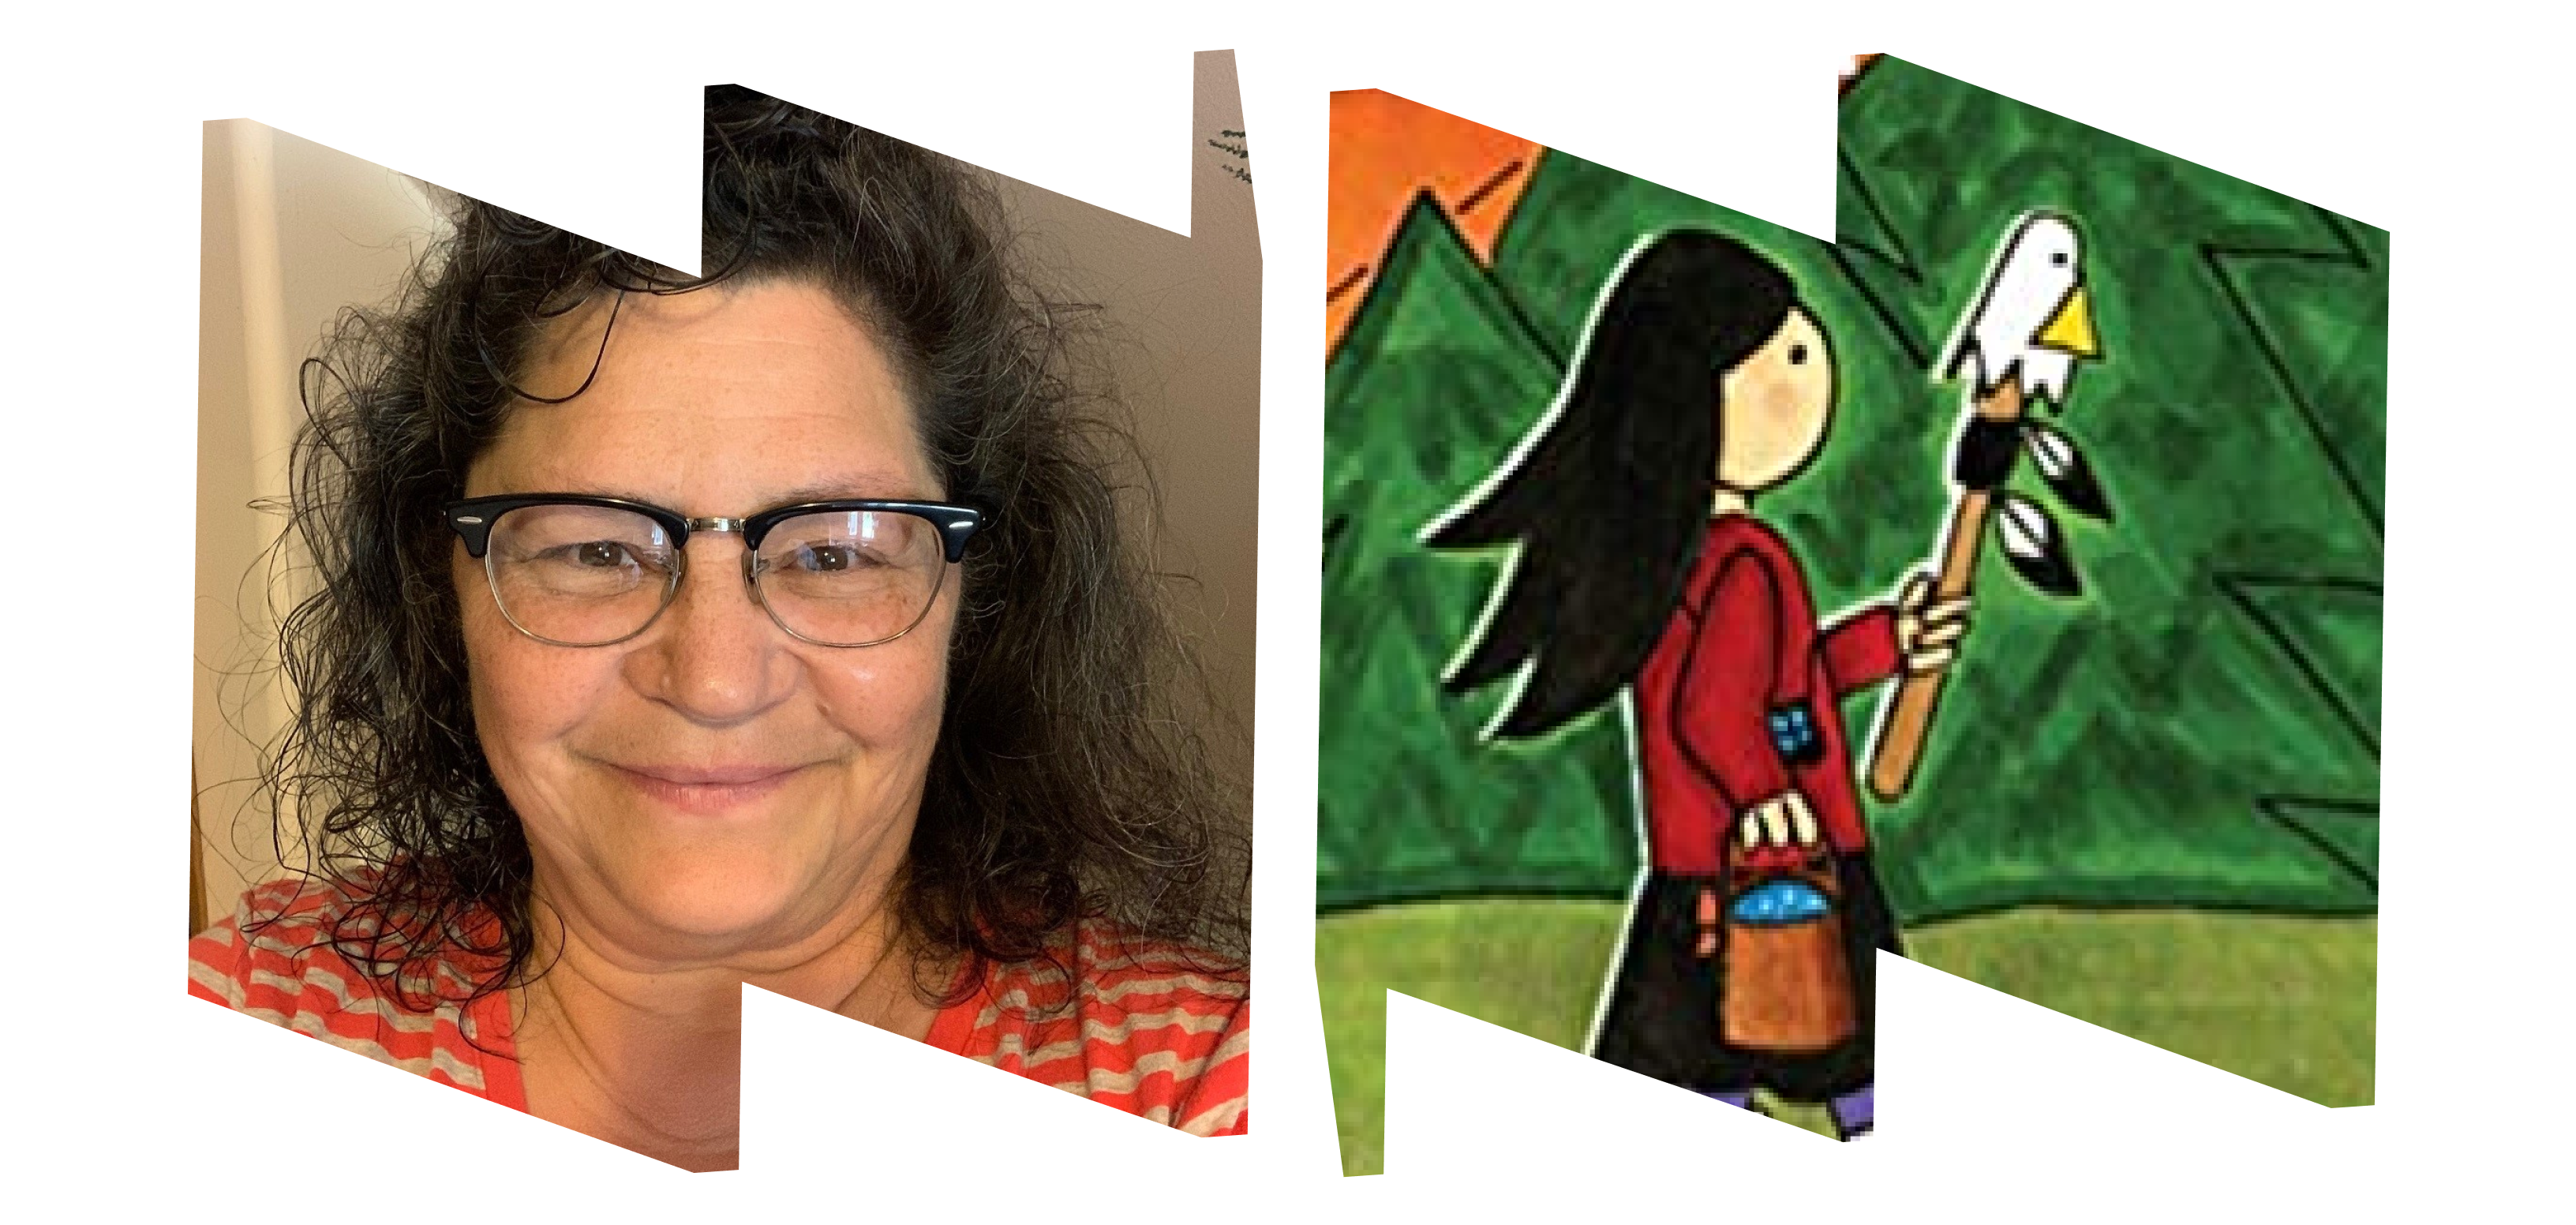 In left "W" frame, headshot of author Joanne Robertson; in right "M" frame, image of young girl walking and carrying watering can from cover of the book